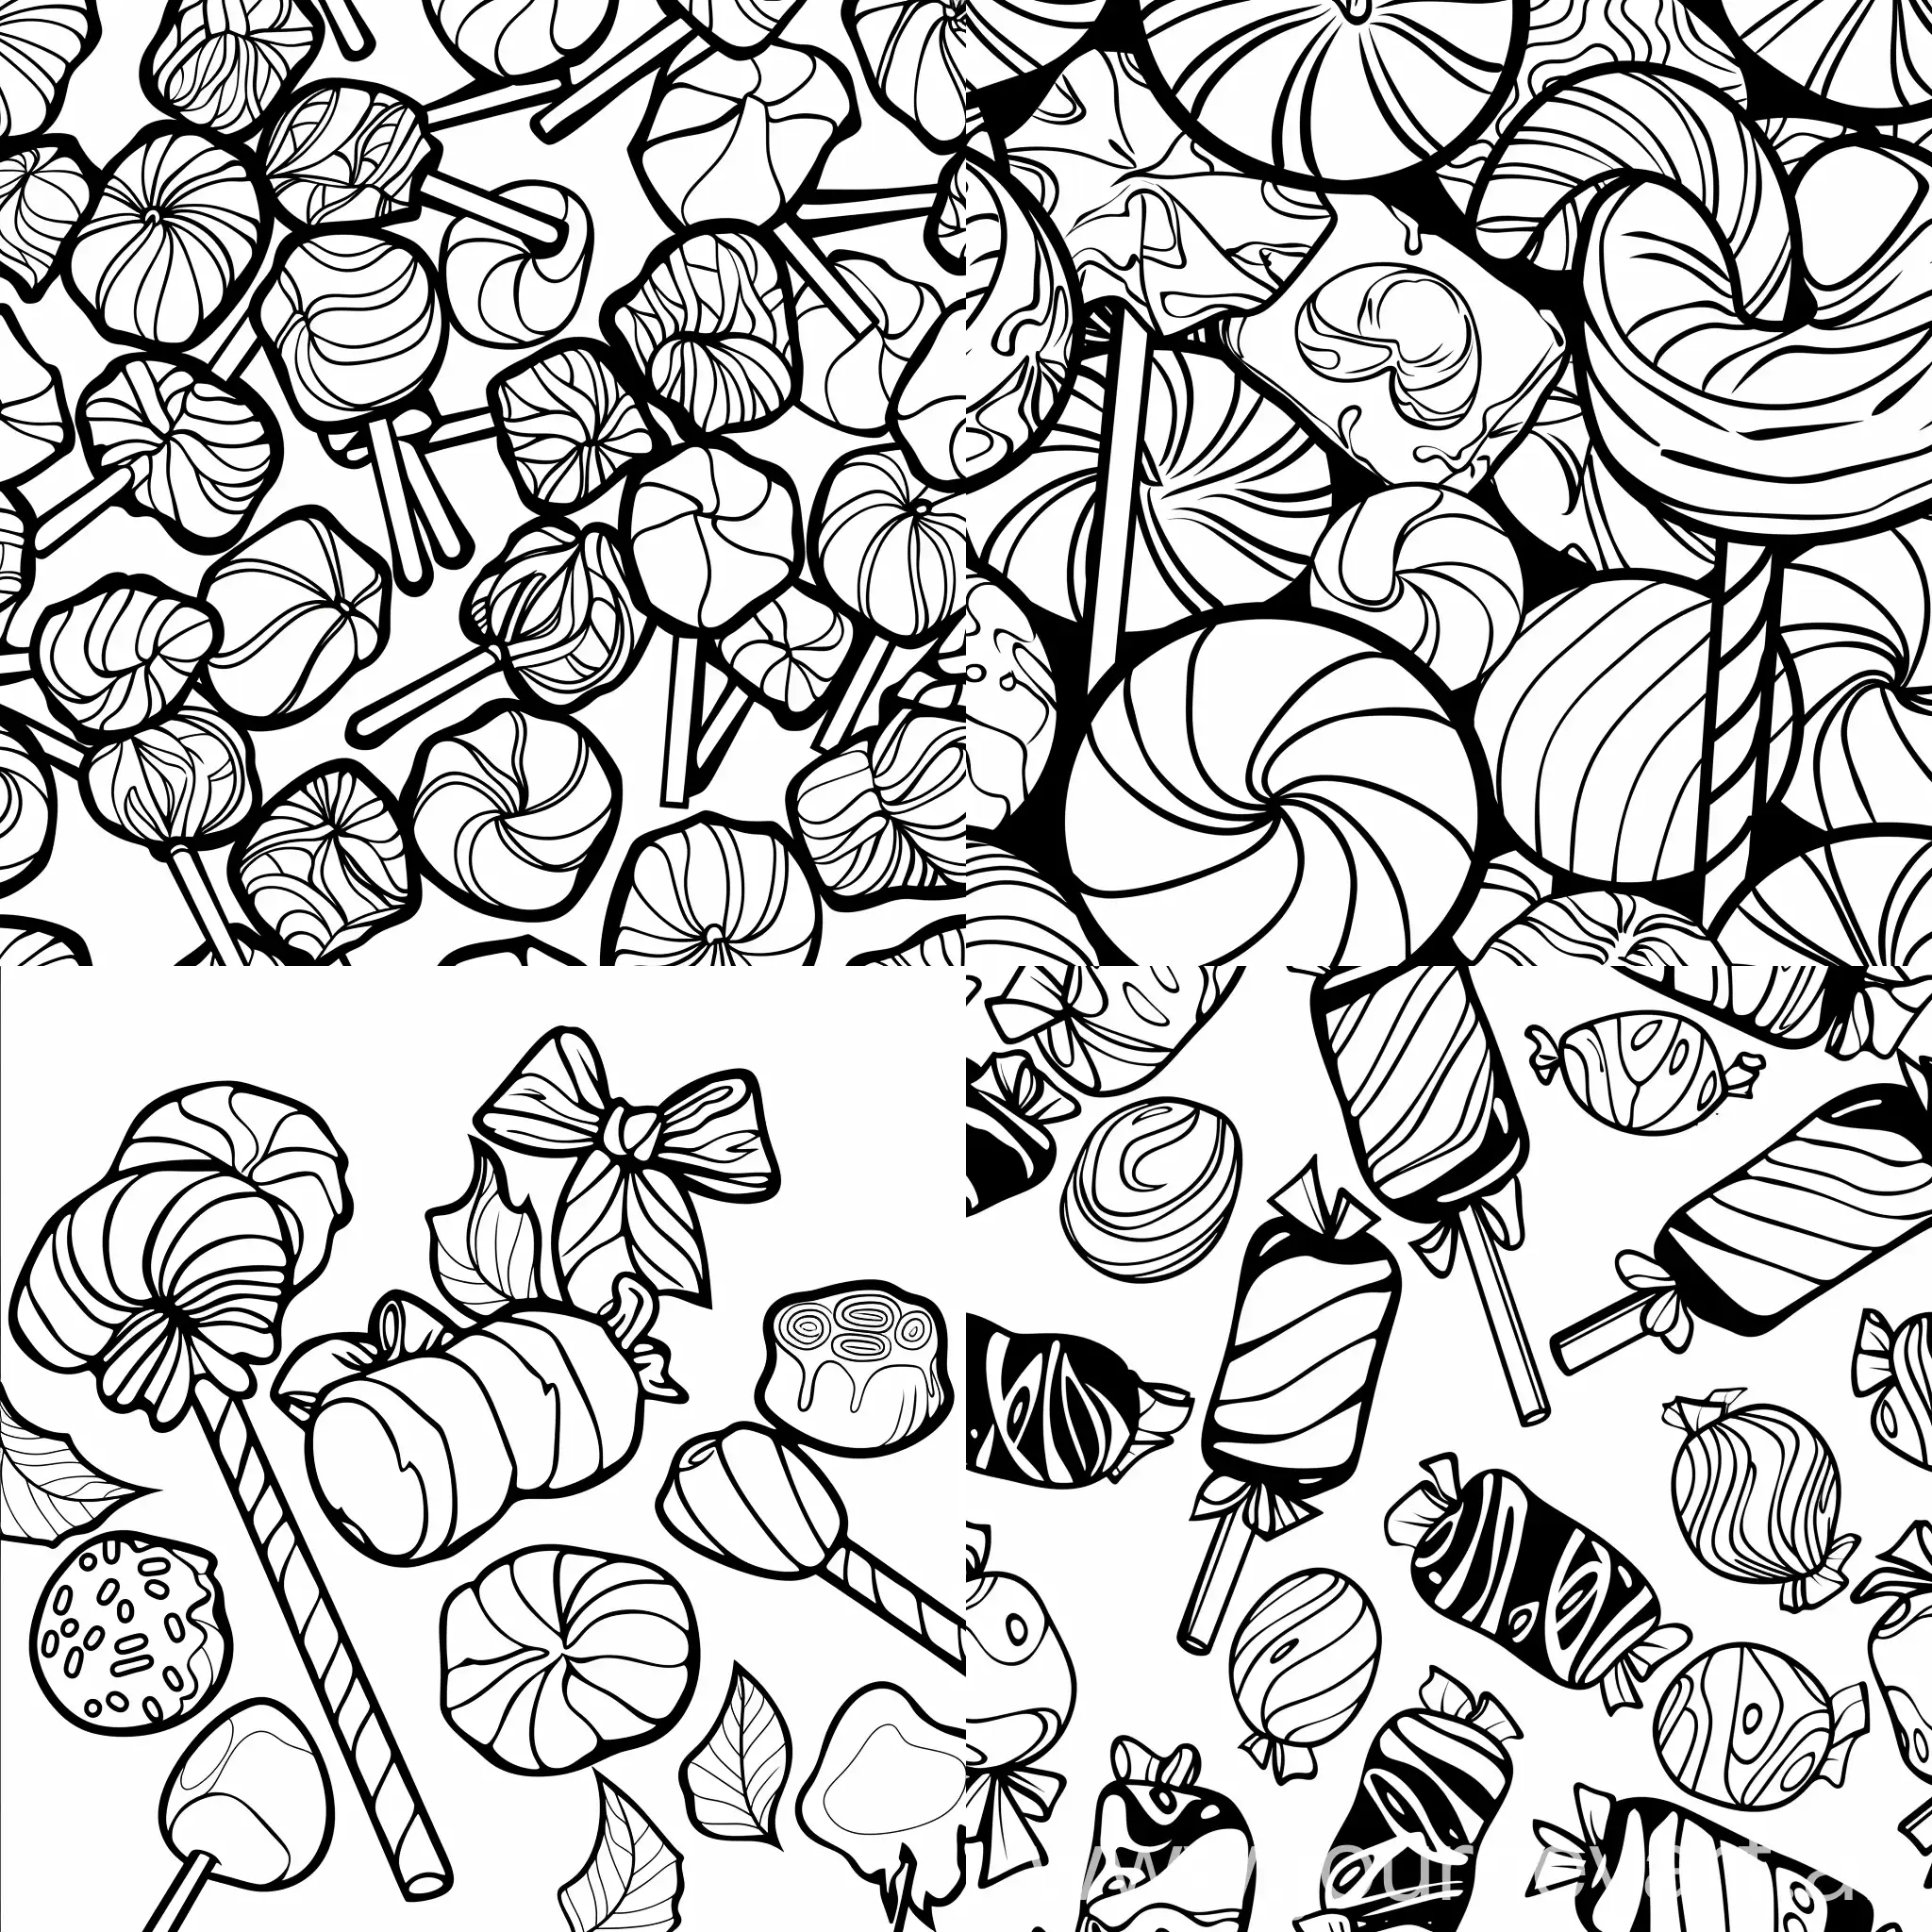 Simple-Candy-Coloring-Page-for-Kids-with-Bold-Lines-on-White-Background